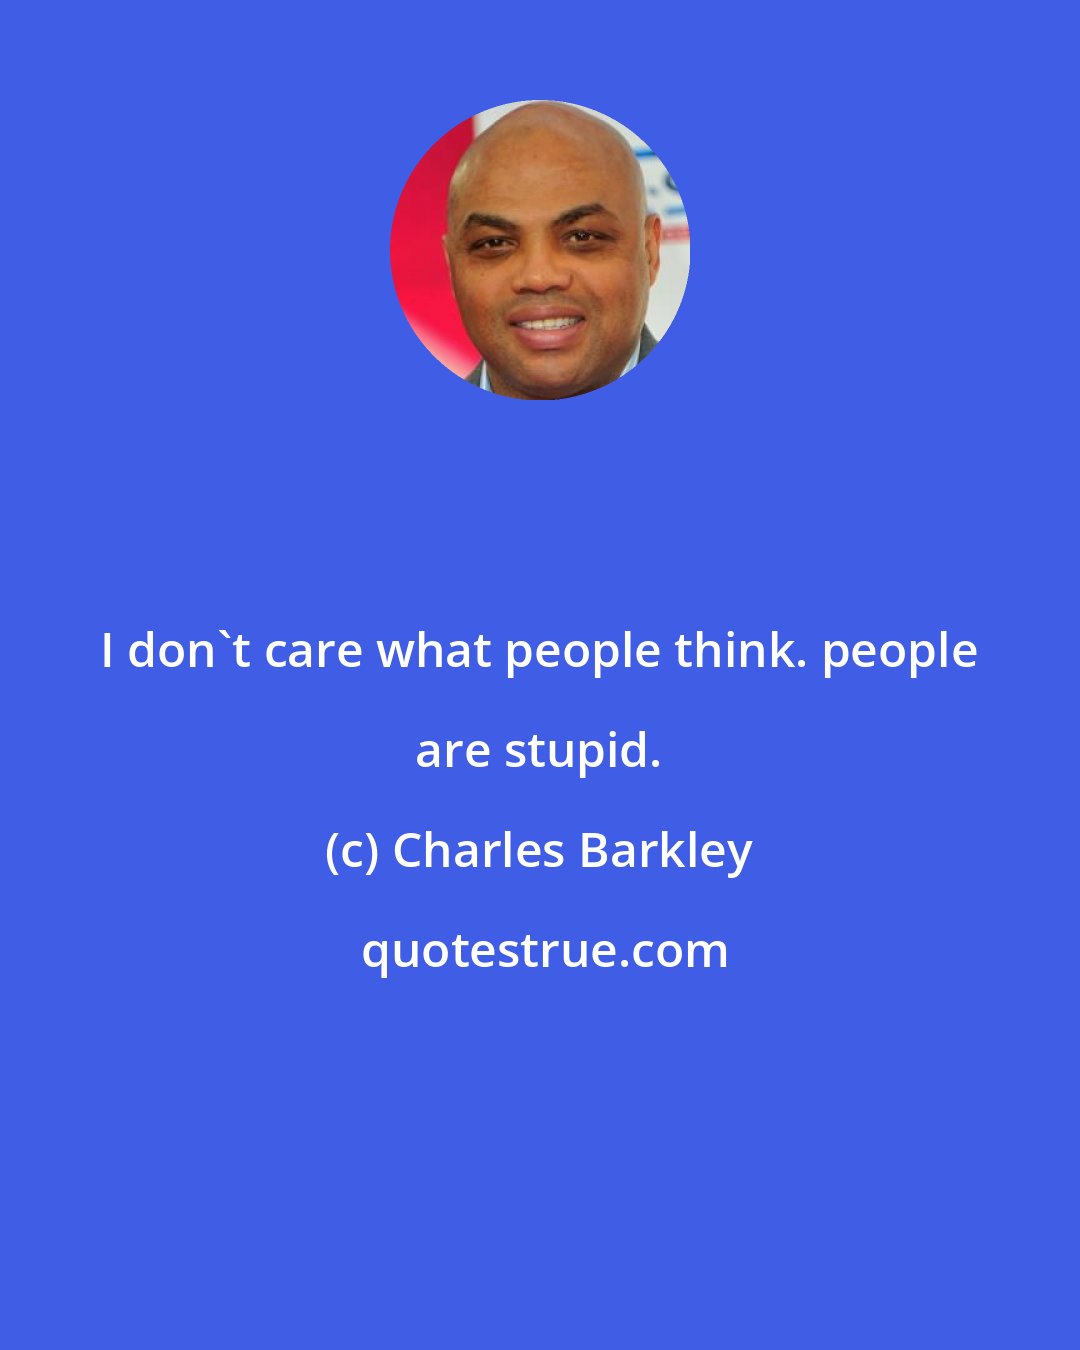 Charles Barkley: I don't care what people think. people are stupid.